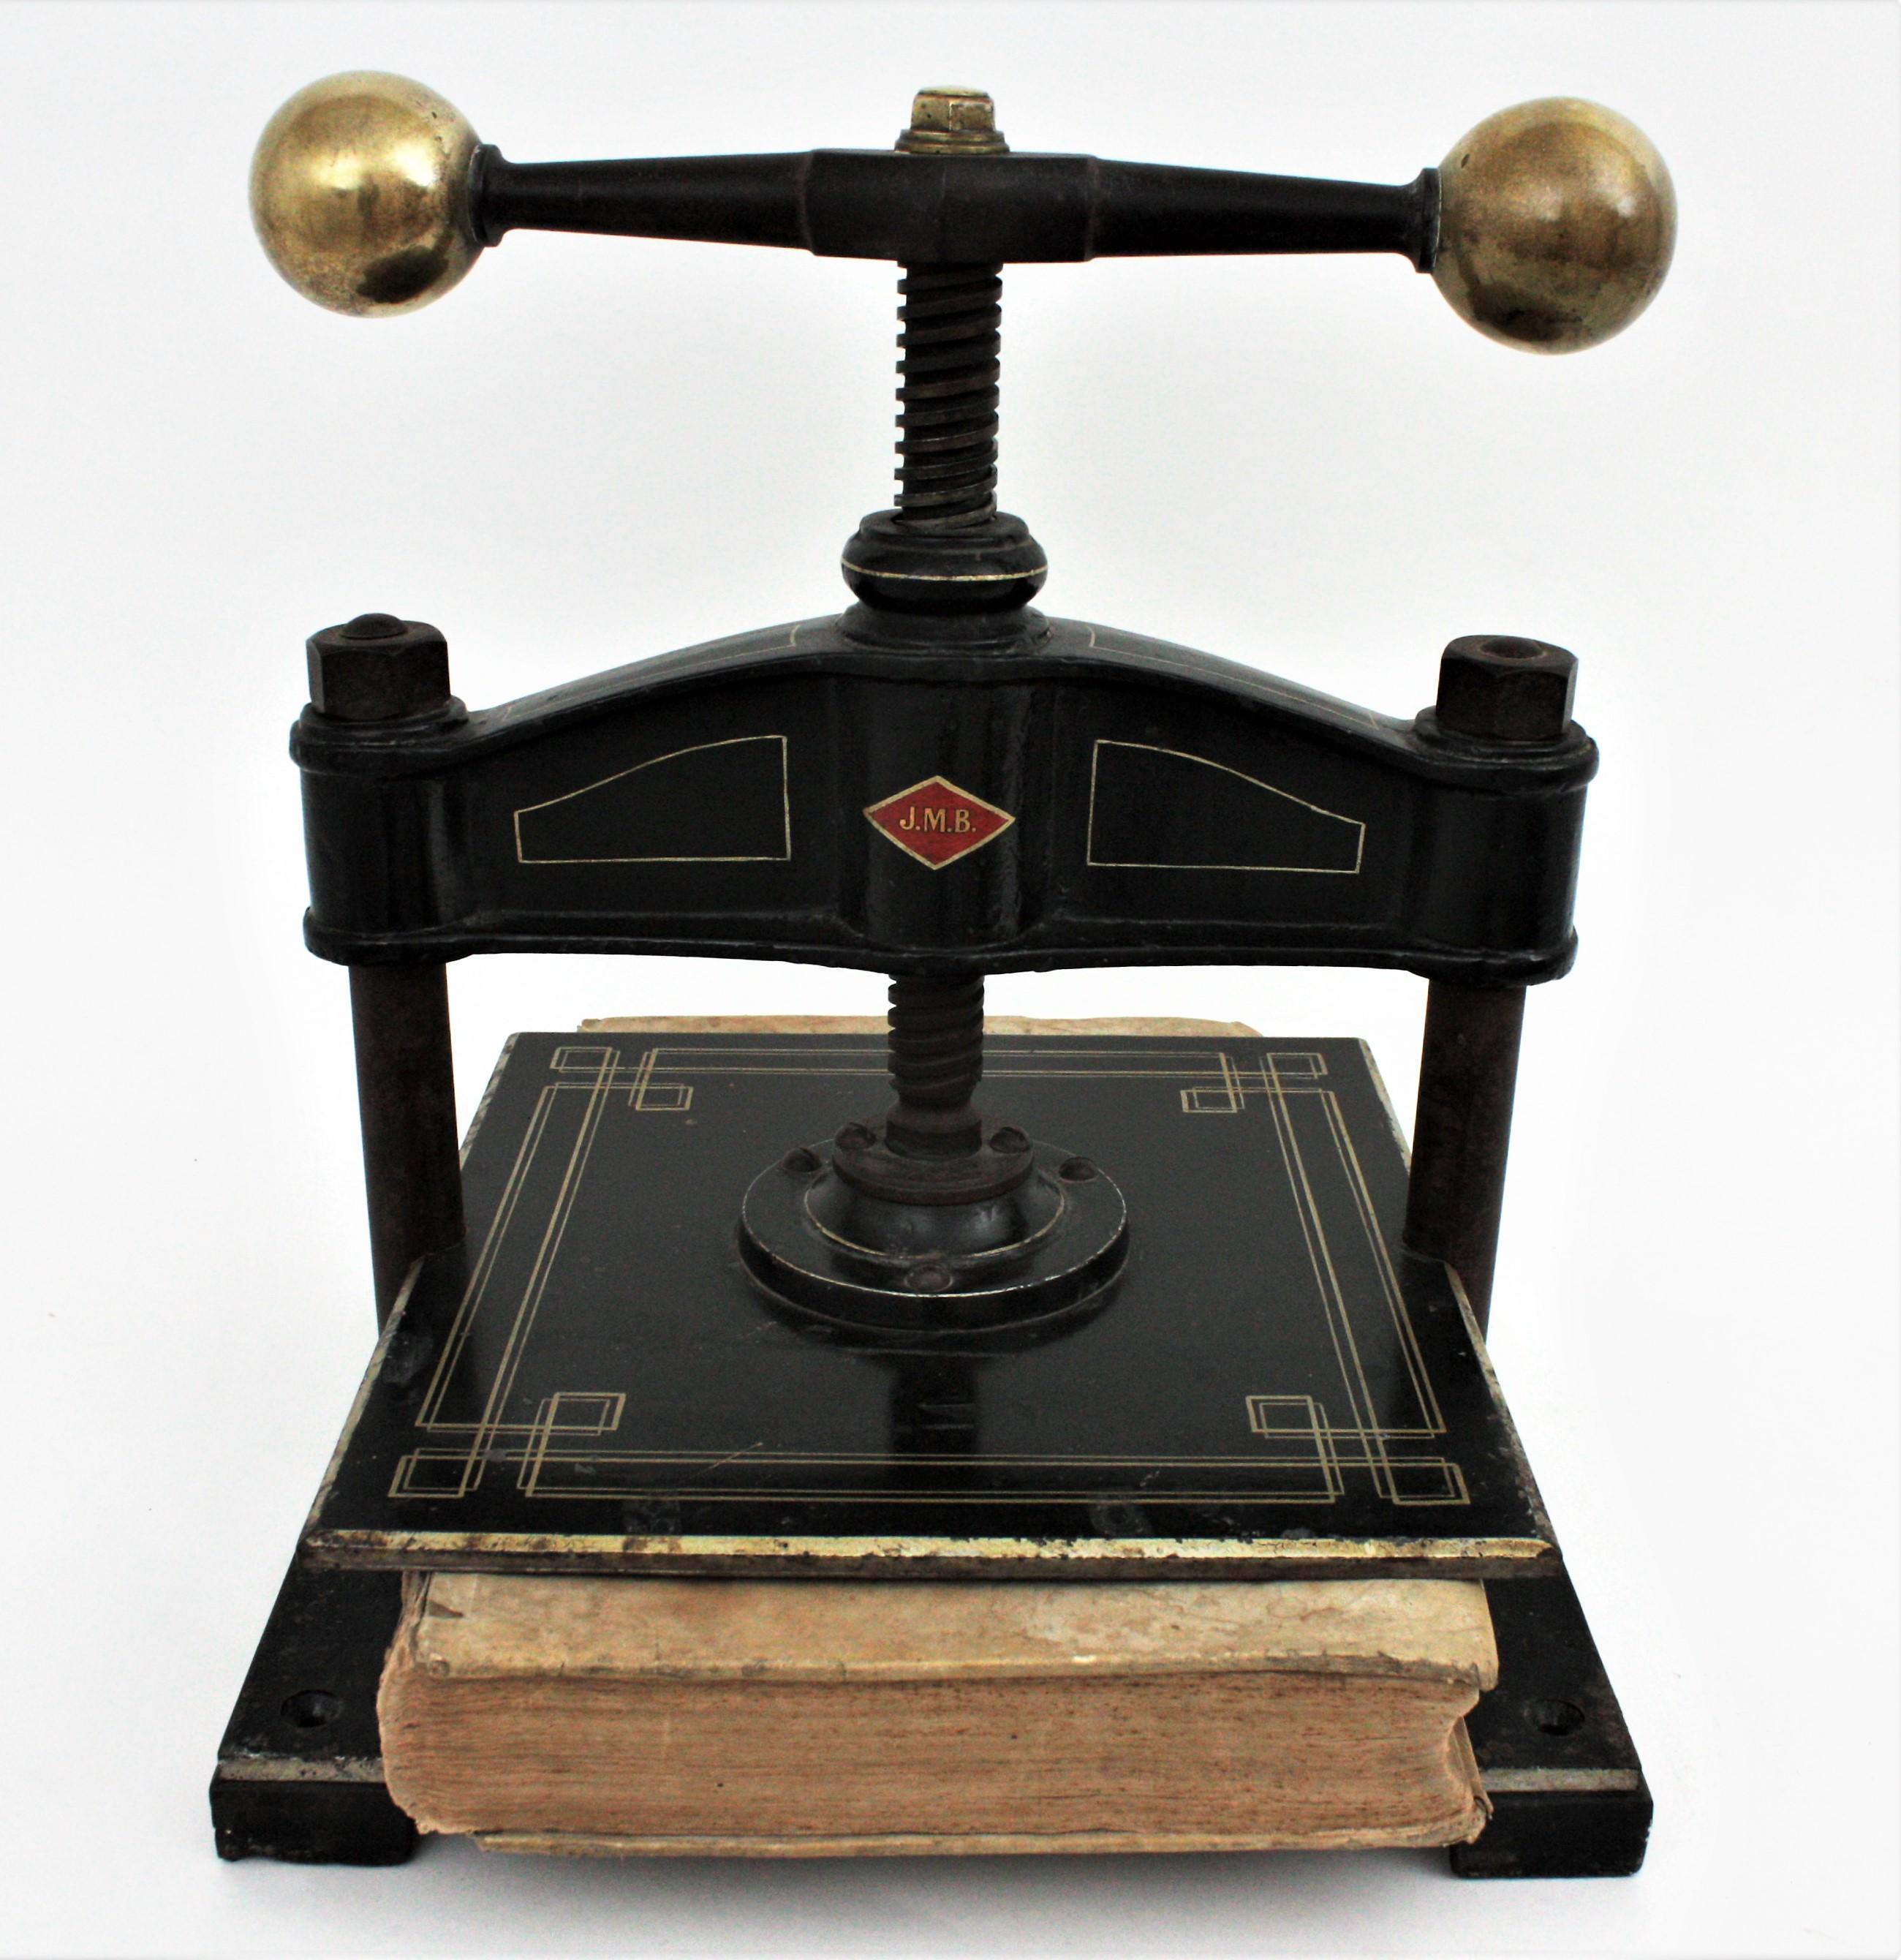 A large industrial black lacquered cast iron book-binding press with gold decoration and brass ball handles. Spain, 1900s.
Square base and golden ornamentations.
The iron press plate is connected to the manual screw controlled by wide handles. The